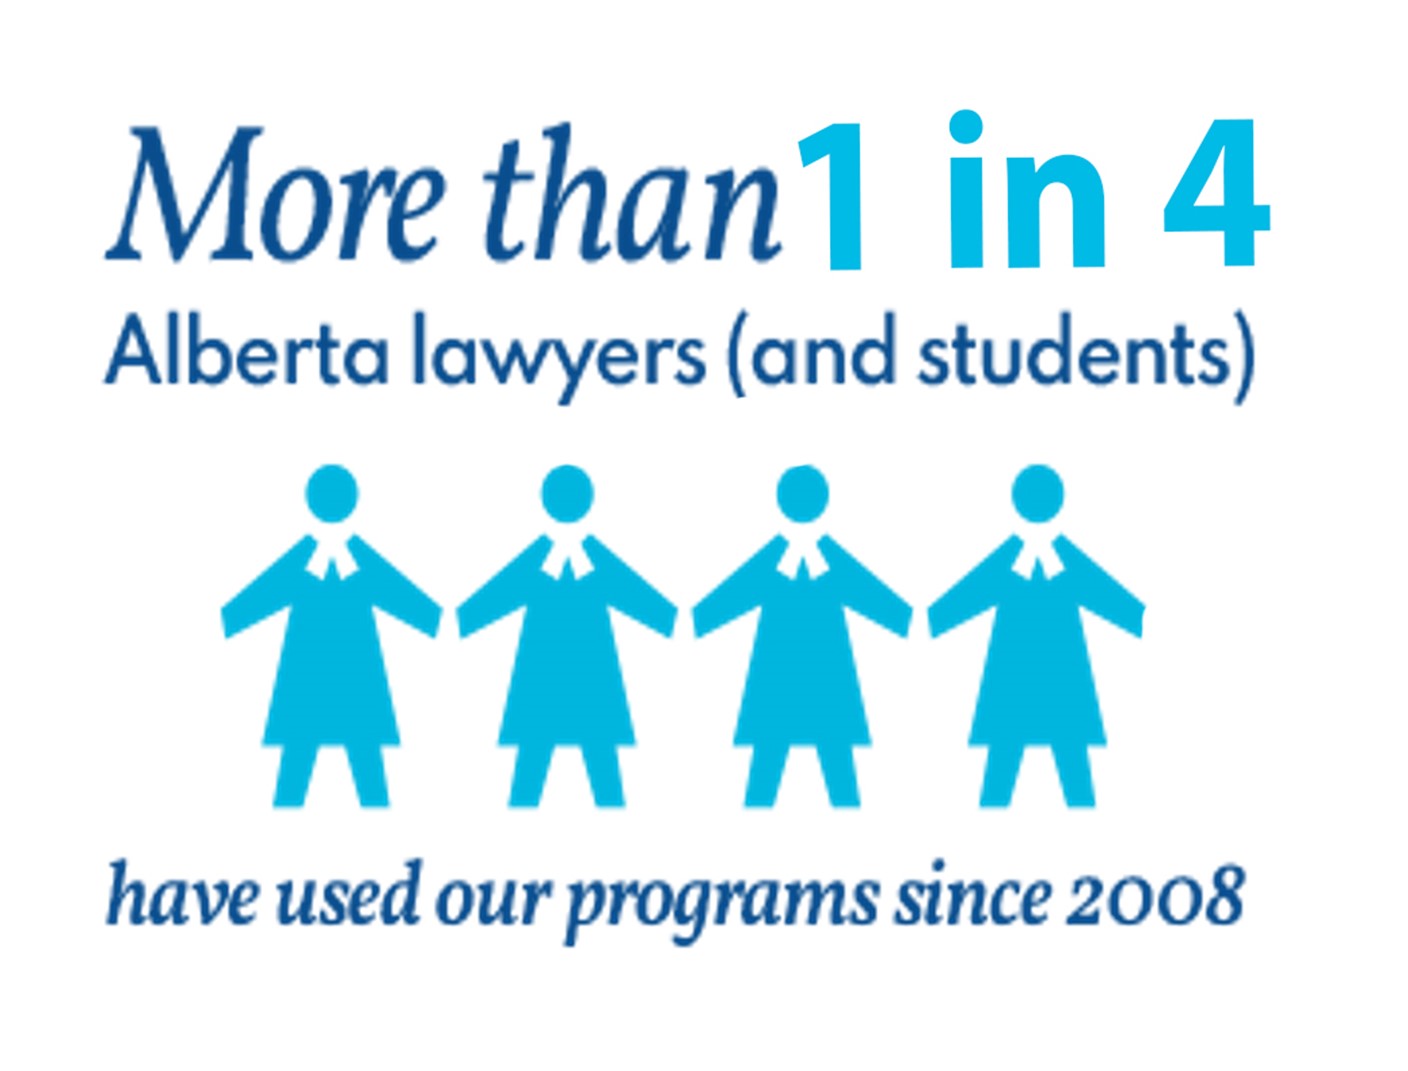 More than 1 in 4 Alberta lawyers and students have used Assist's programs since 2008